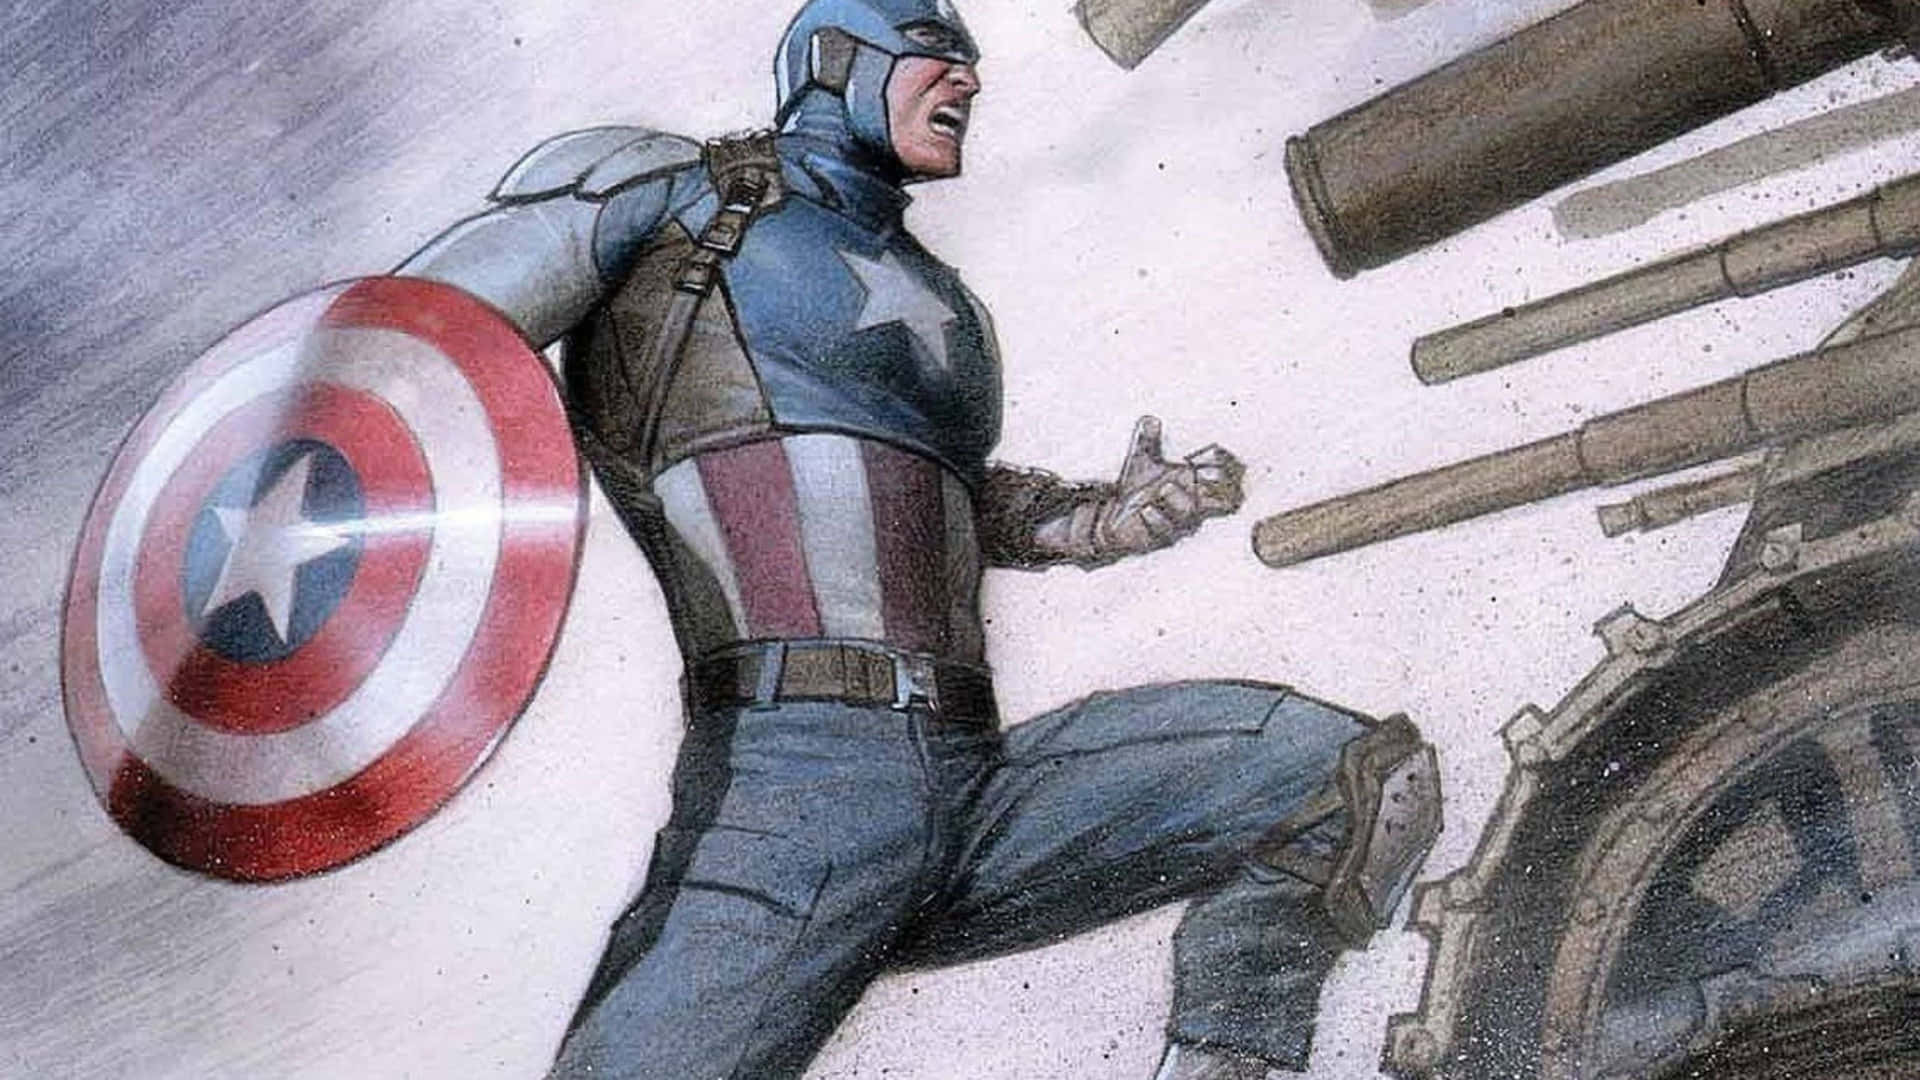 "The Sentinel of Liberty, Captain America"